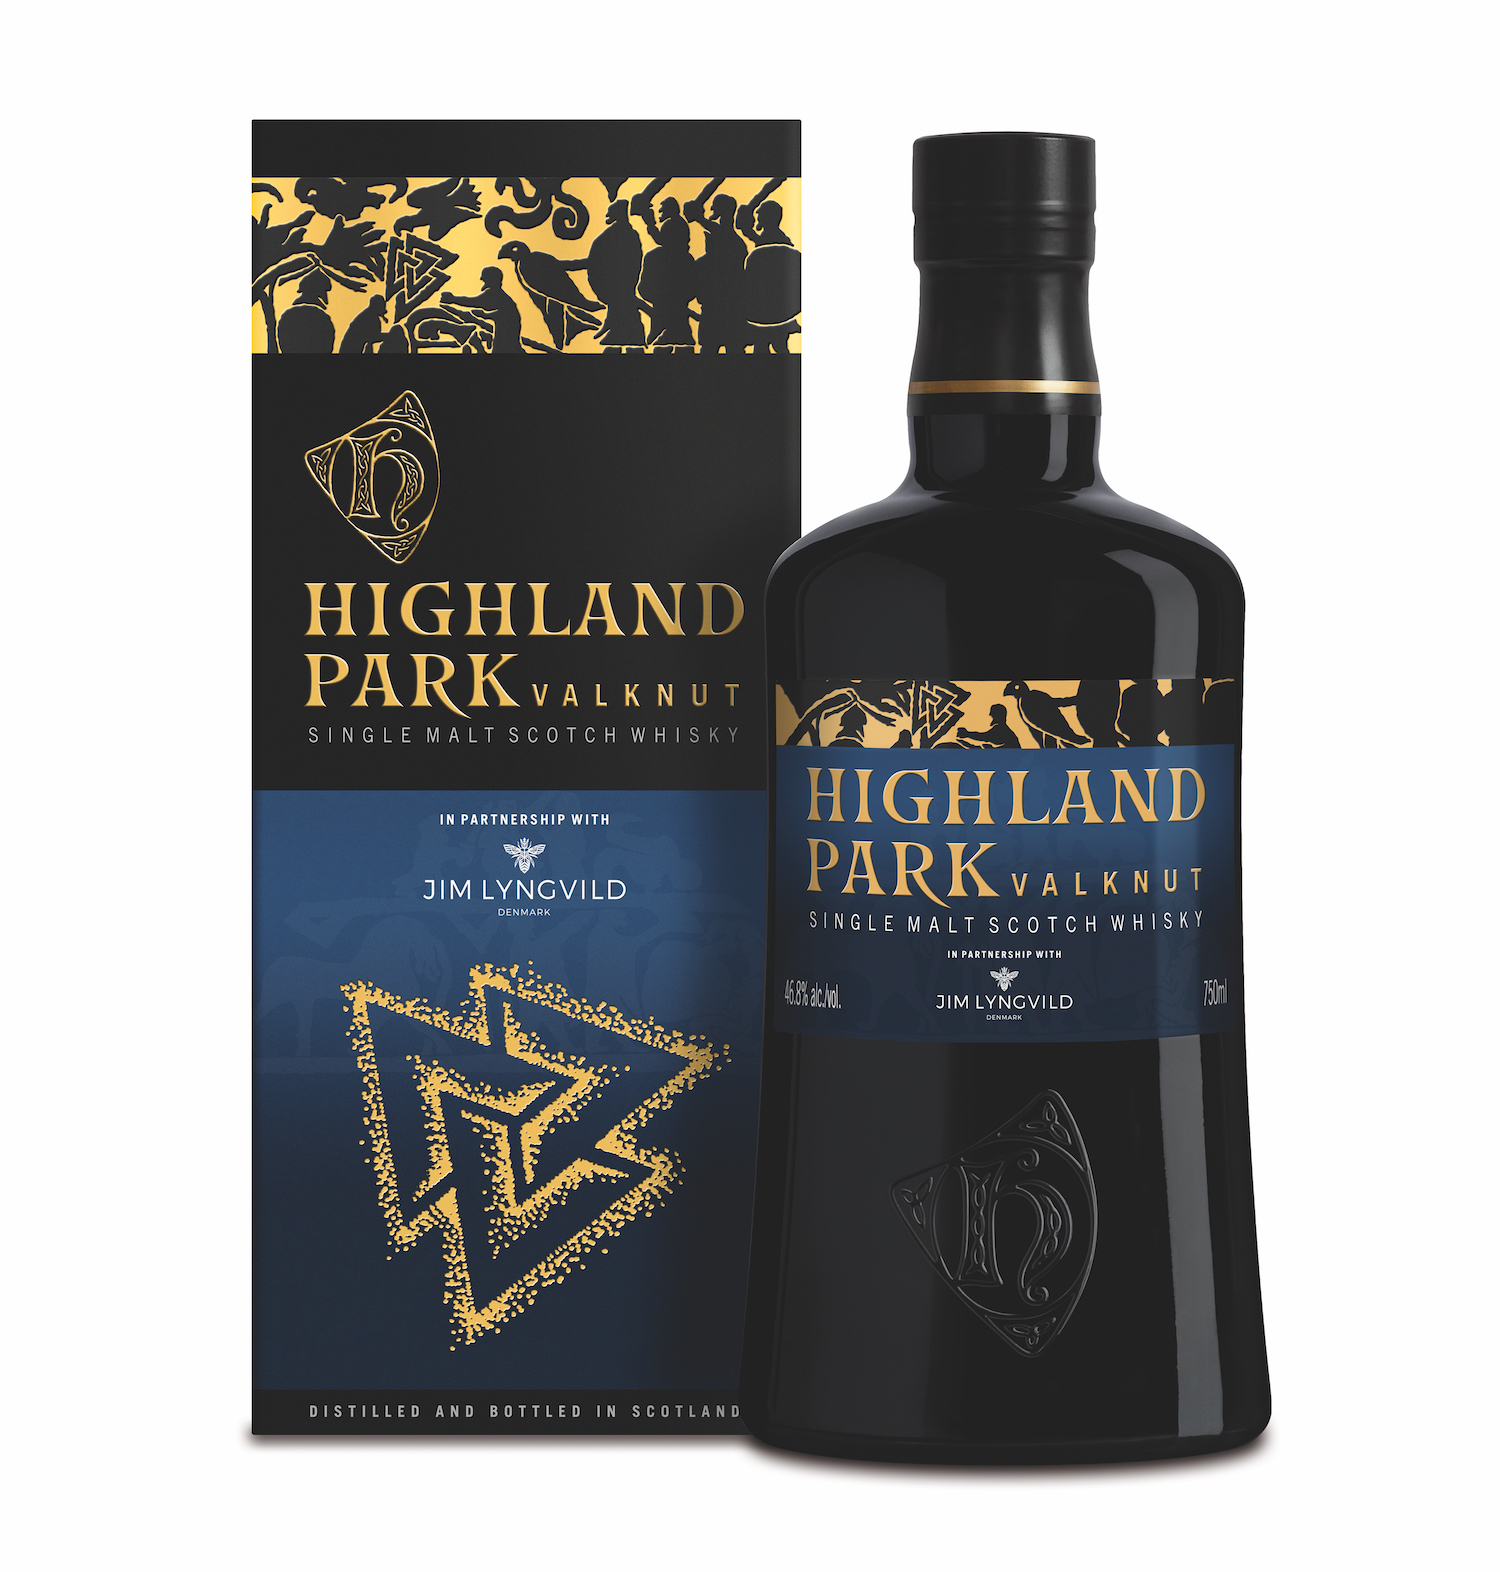 Image provided by Highland Park.